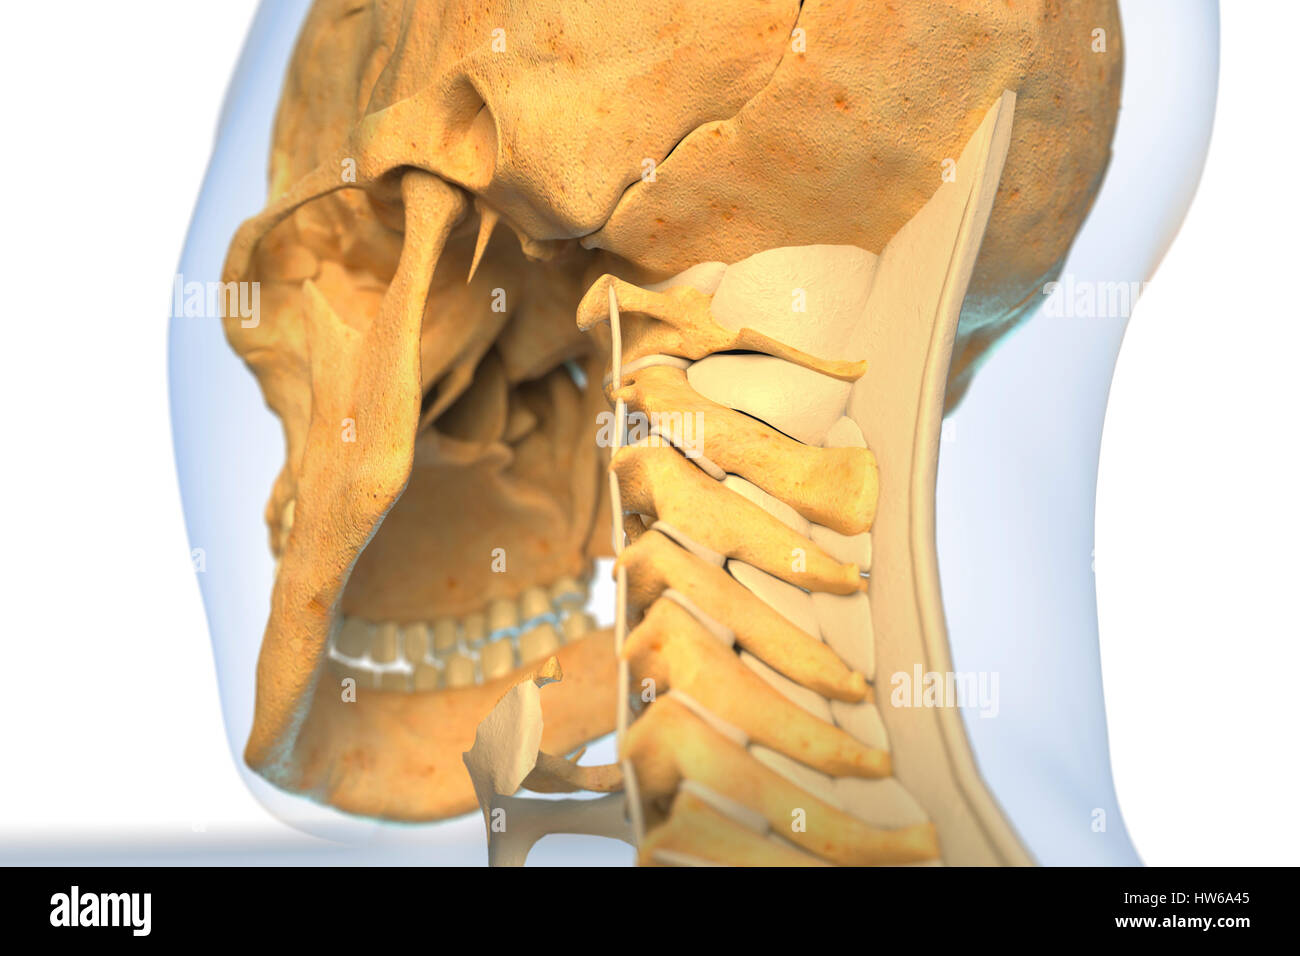 Ligaments of the human neck, illustration. Stock Photo